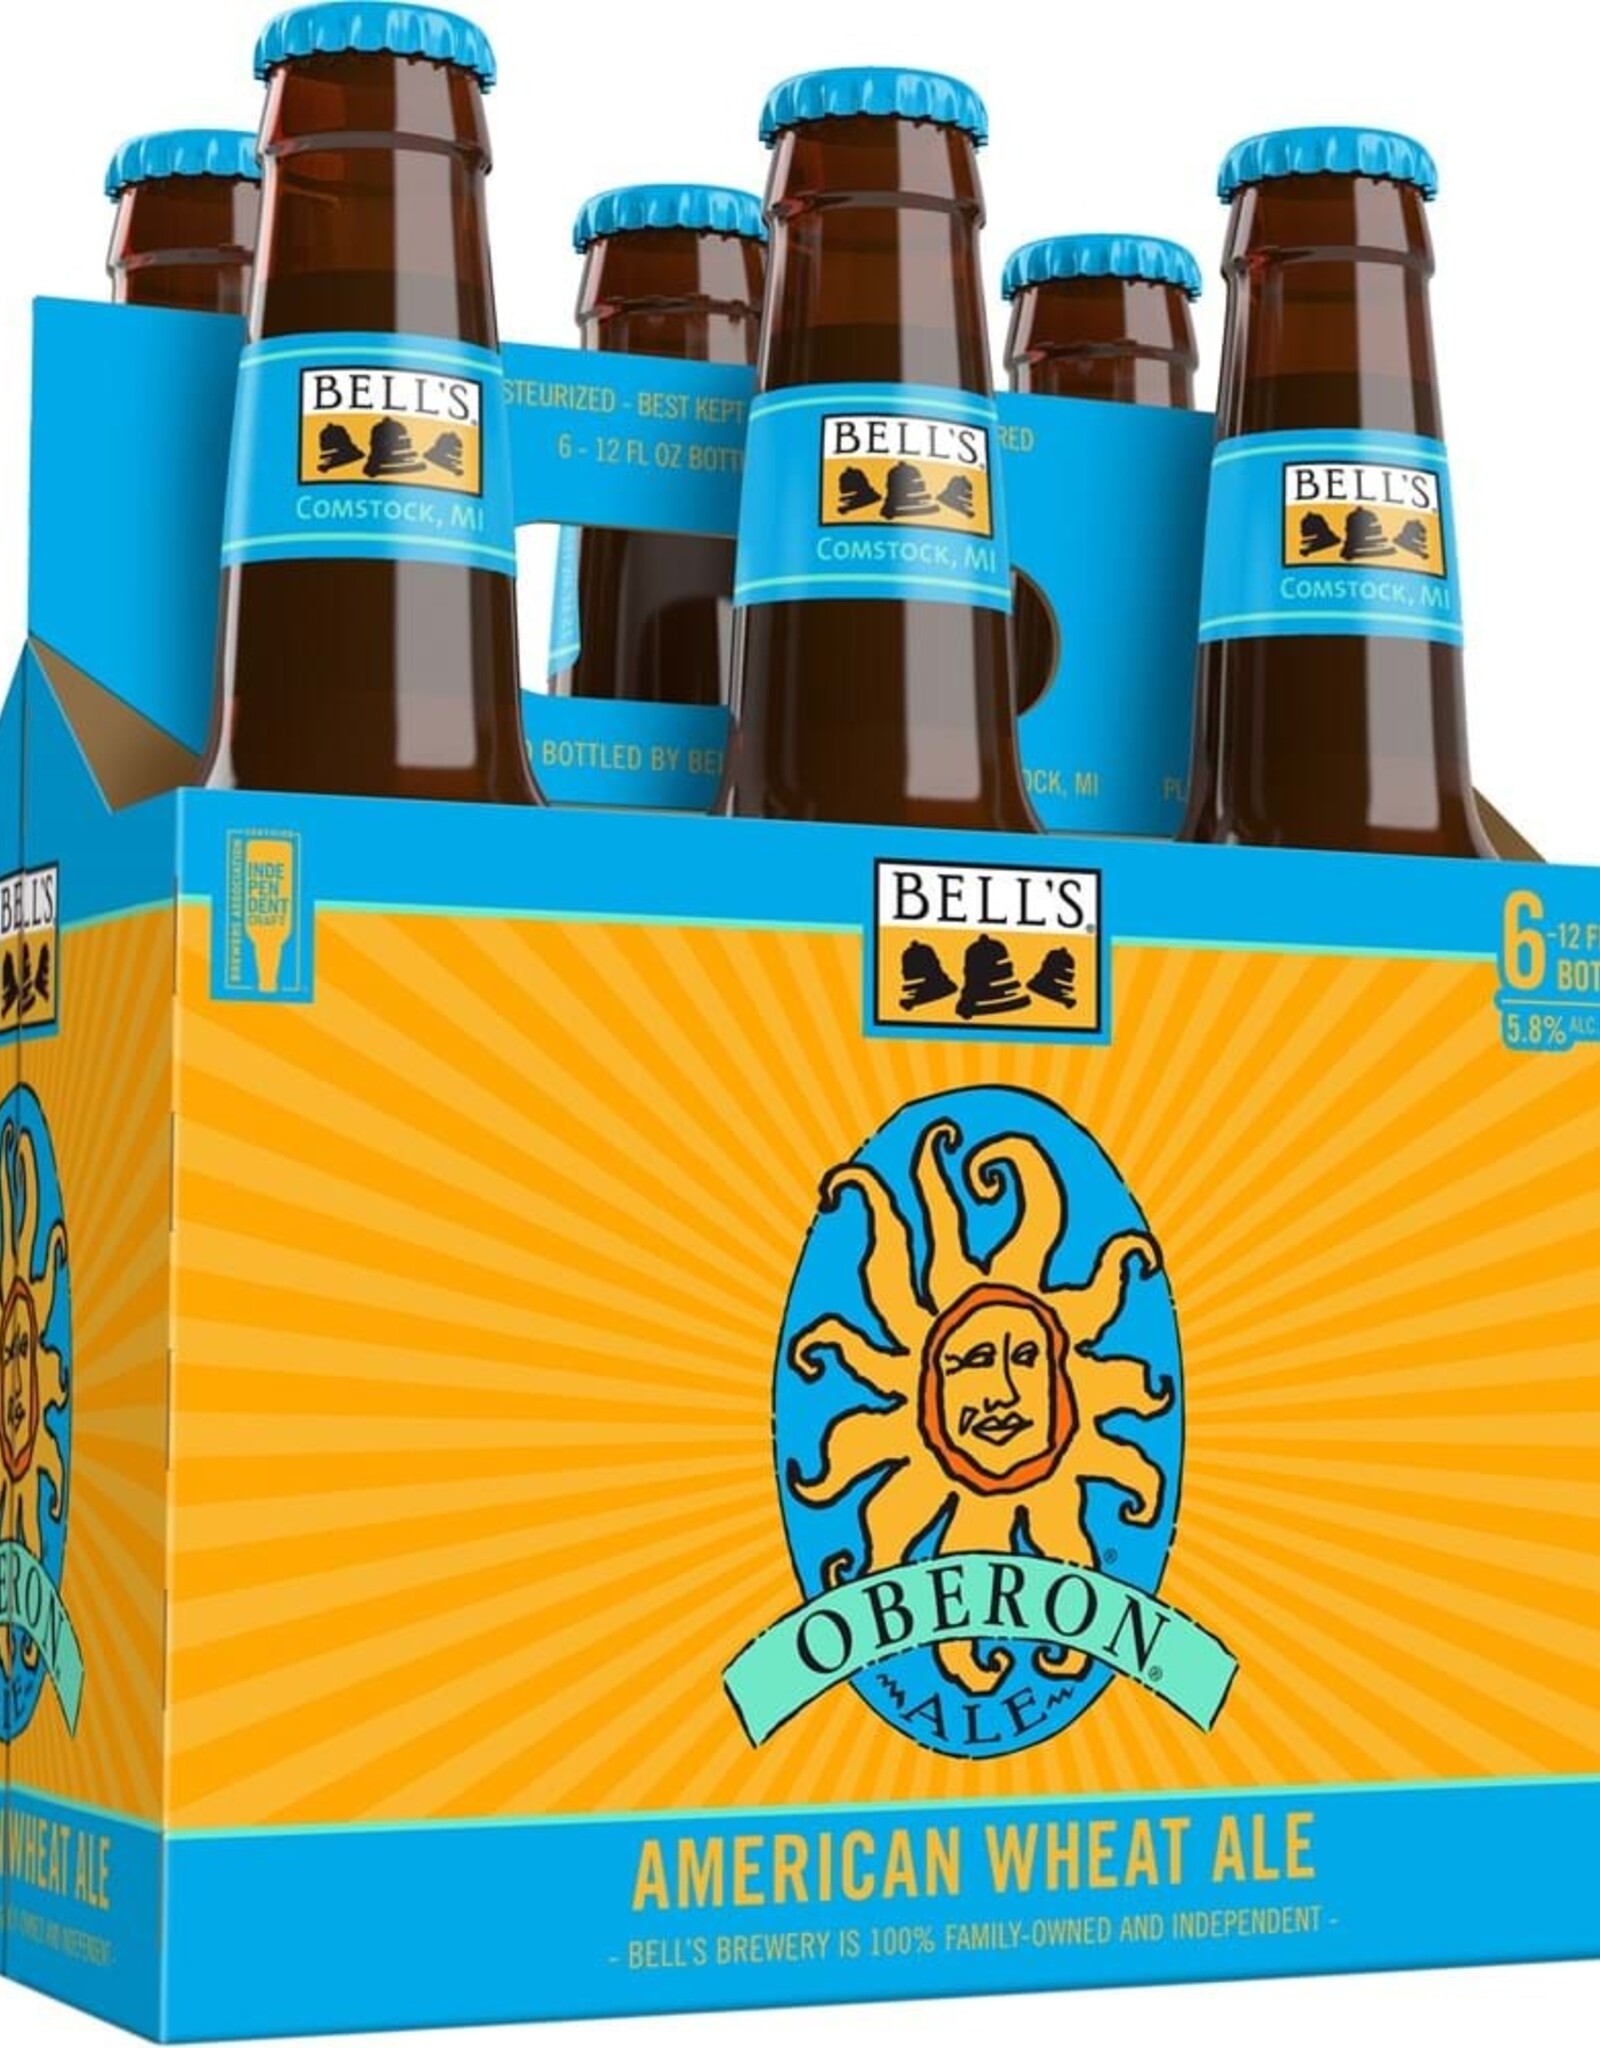 Bell's Bell's Oberon Wheat Ale